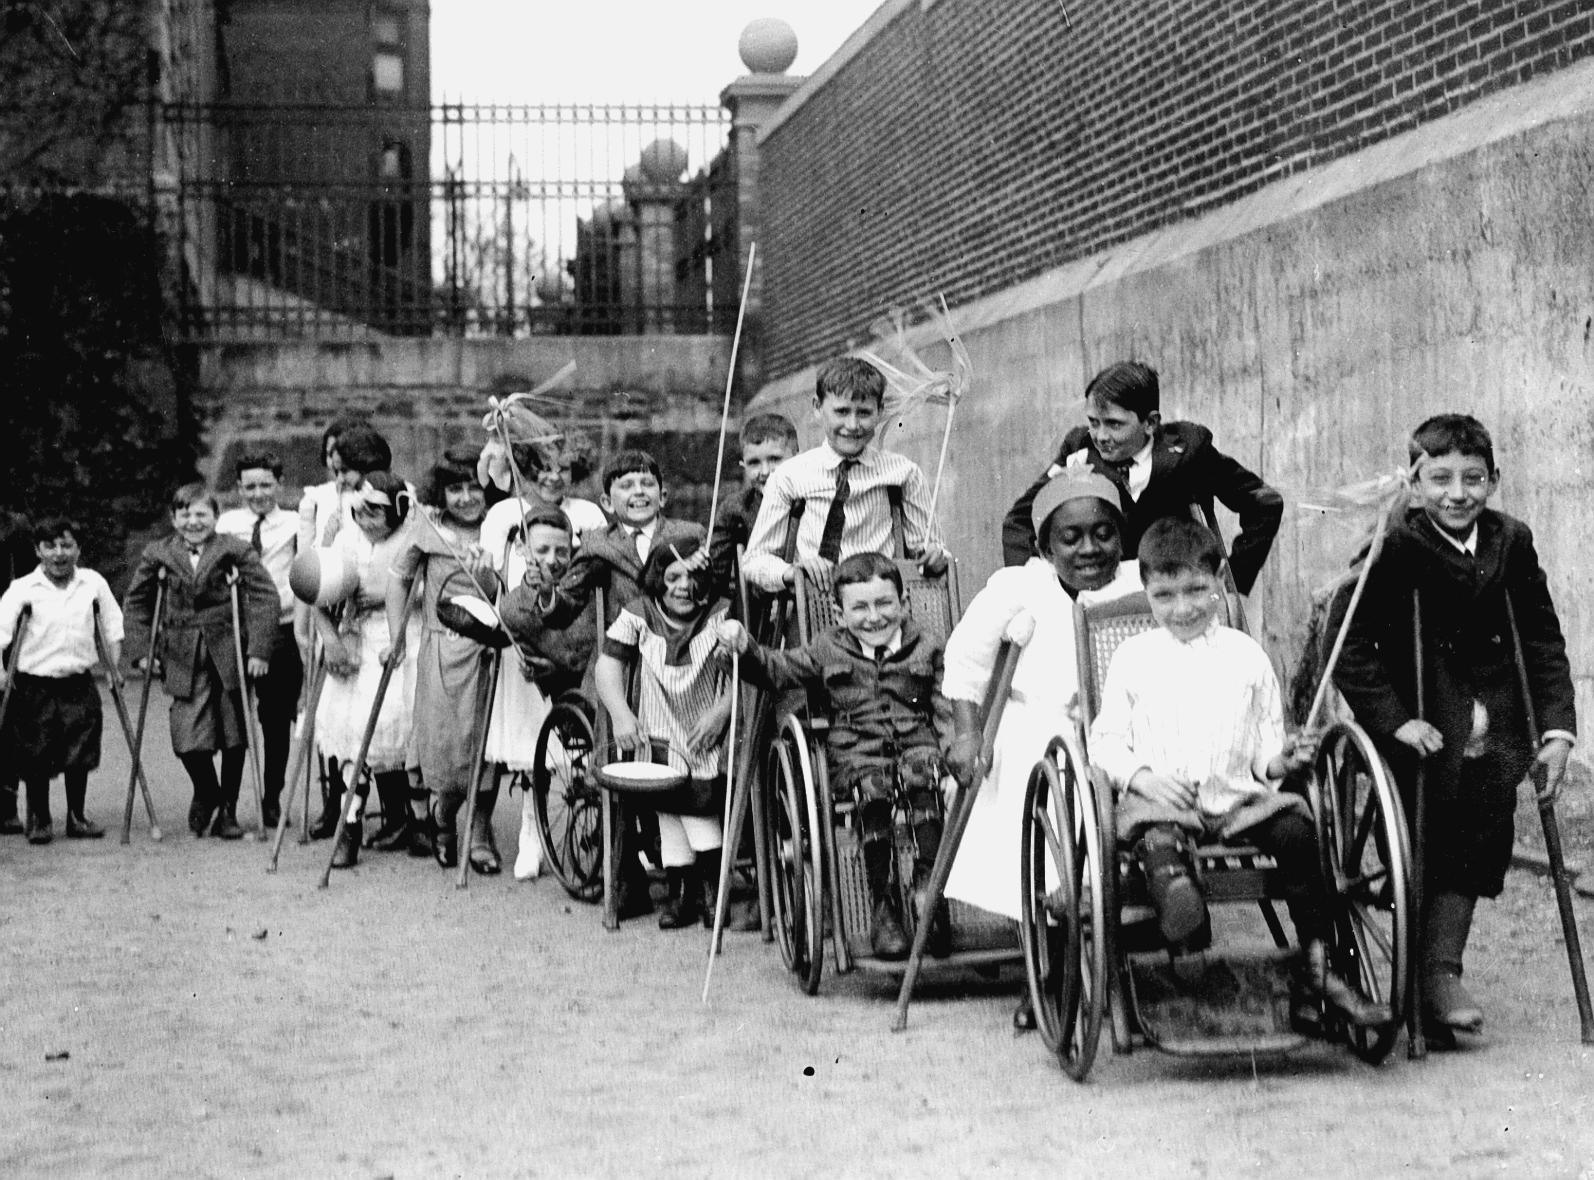 Children who are students at Cotting School, using wheelchairs and crutches at the school lined up single file outdoors. The children are smiling and appear to be having fun.